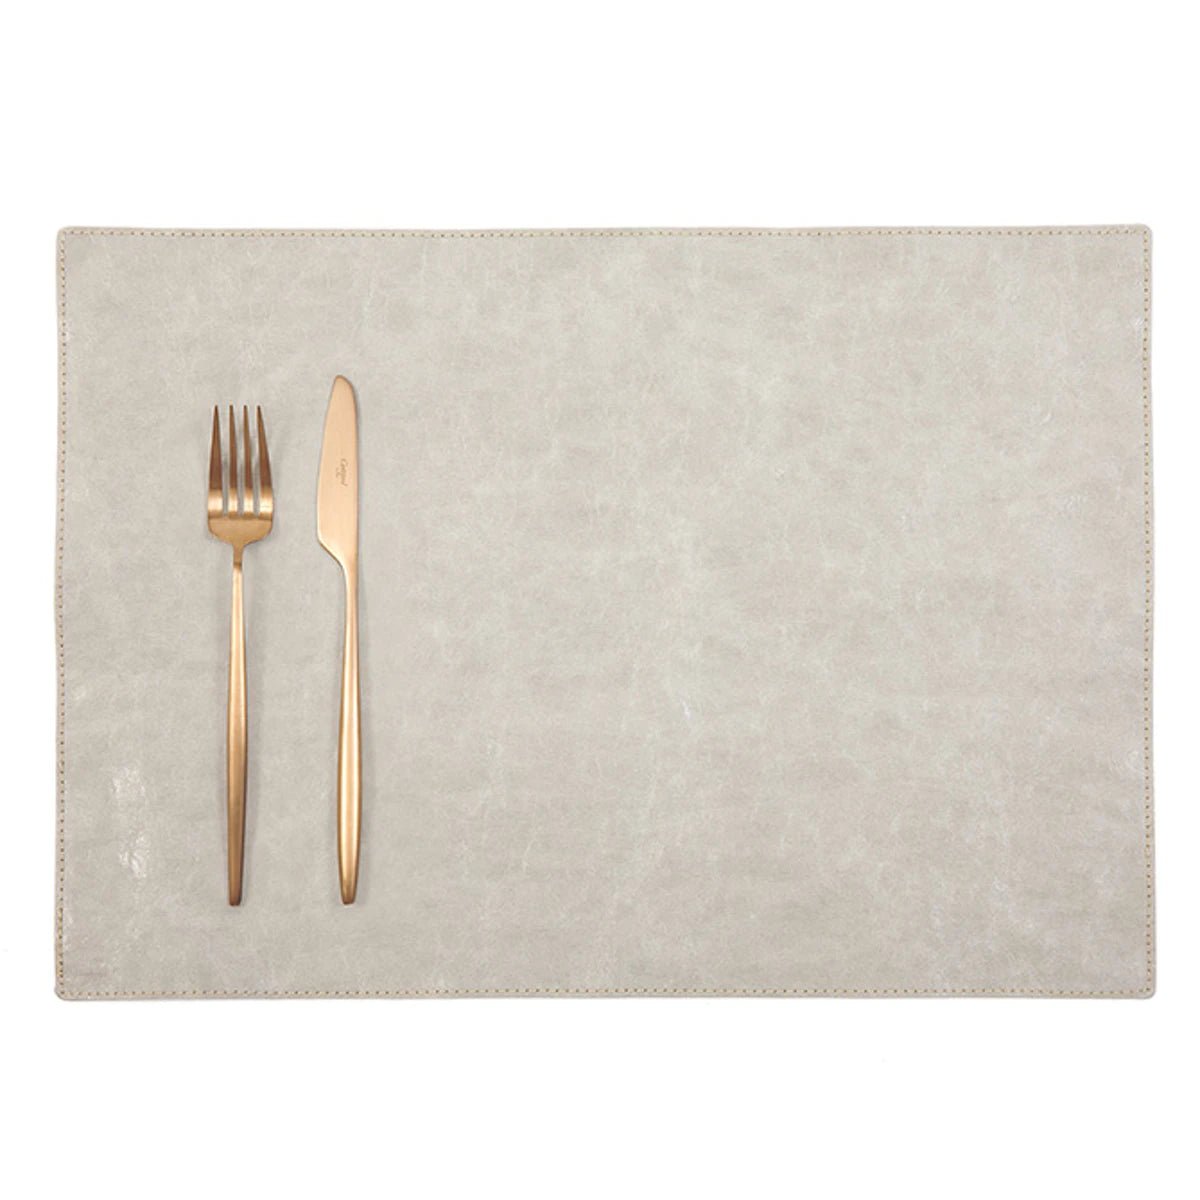 A rectangular washable paper placemat is shown with a rose gold fork and knife set on the left hand side. The placemat is cream.